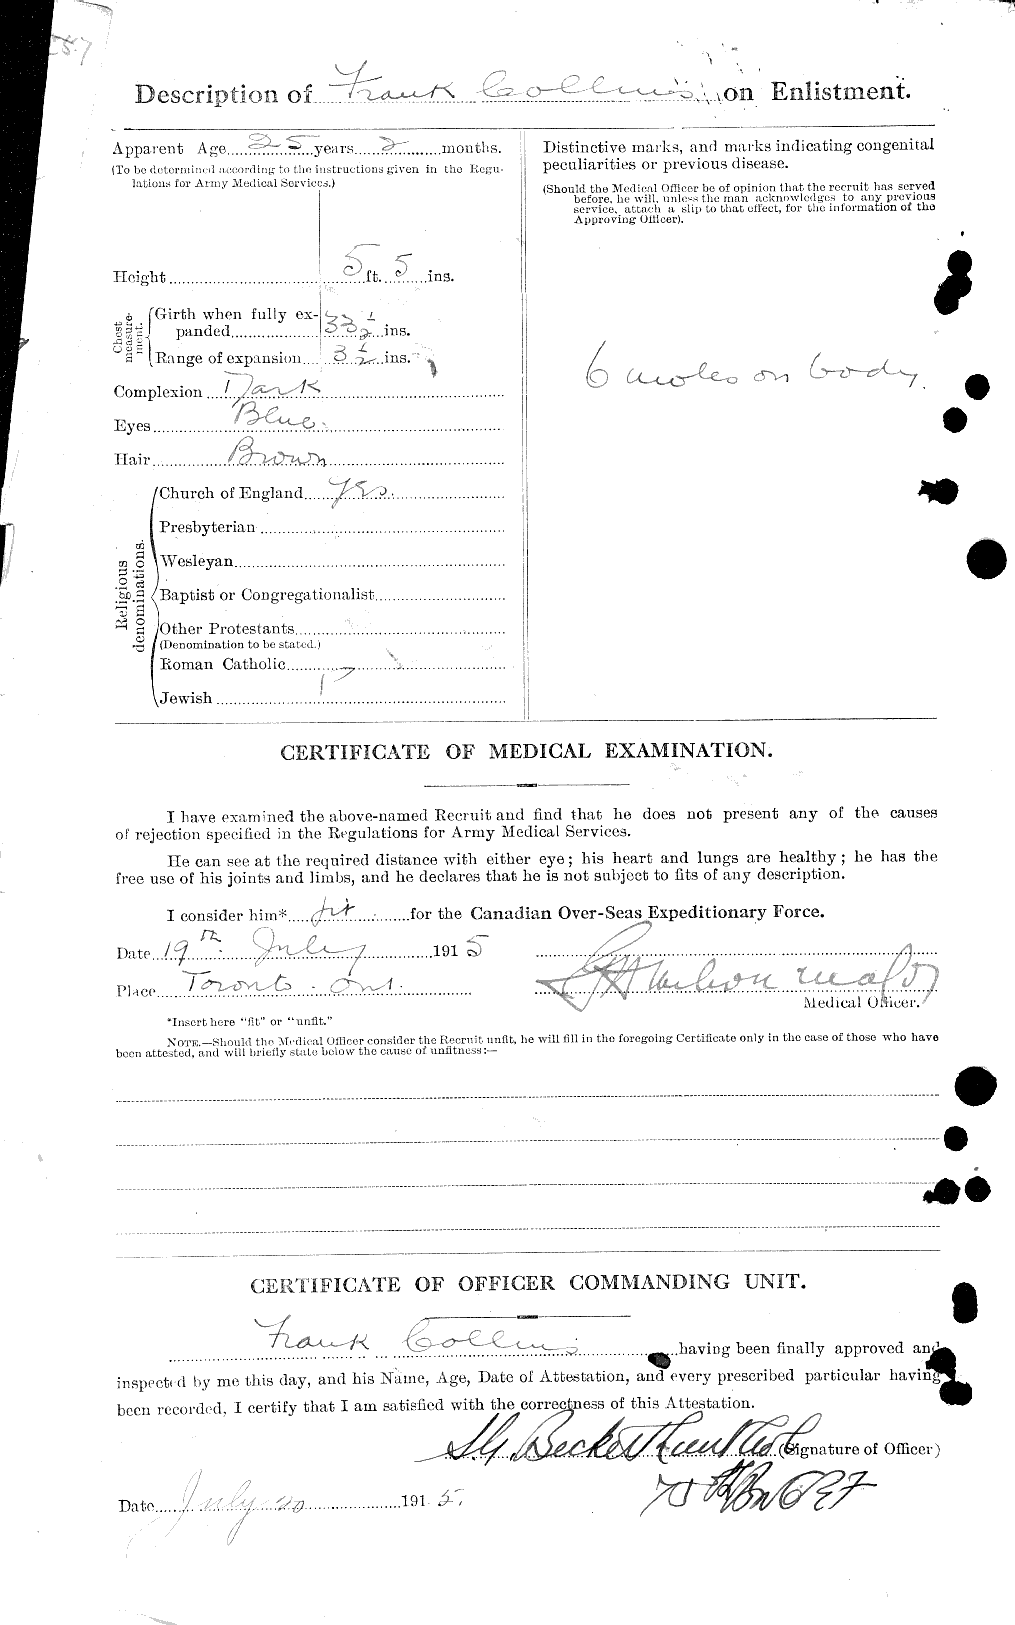 Personnel Records of the First World War - CEF 037783b